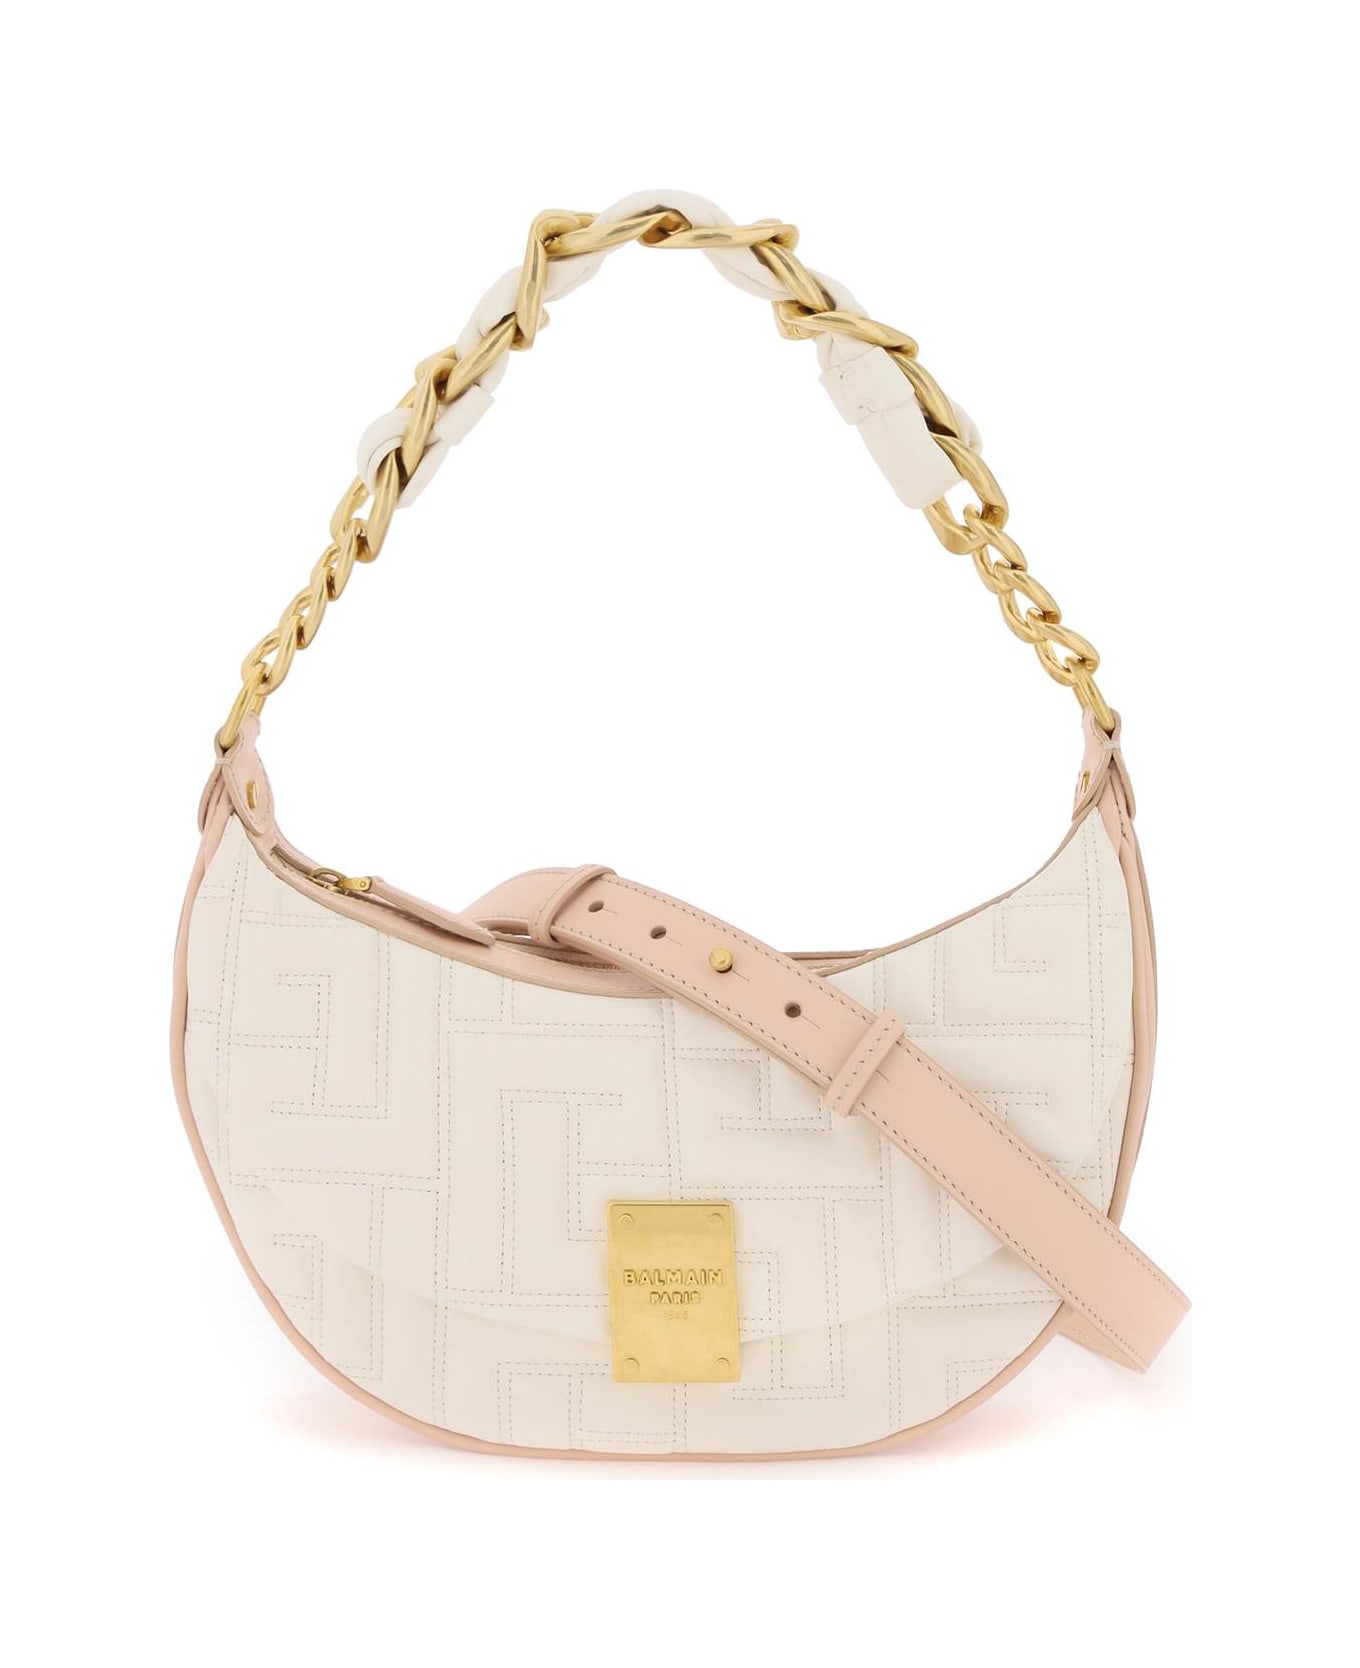 Balmain 1945 Soft Quilted Leather Hobo Bag - CREME NUDE ROSÉ (White)